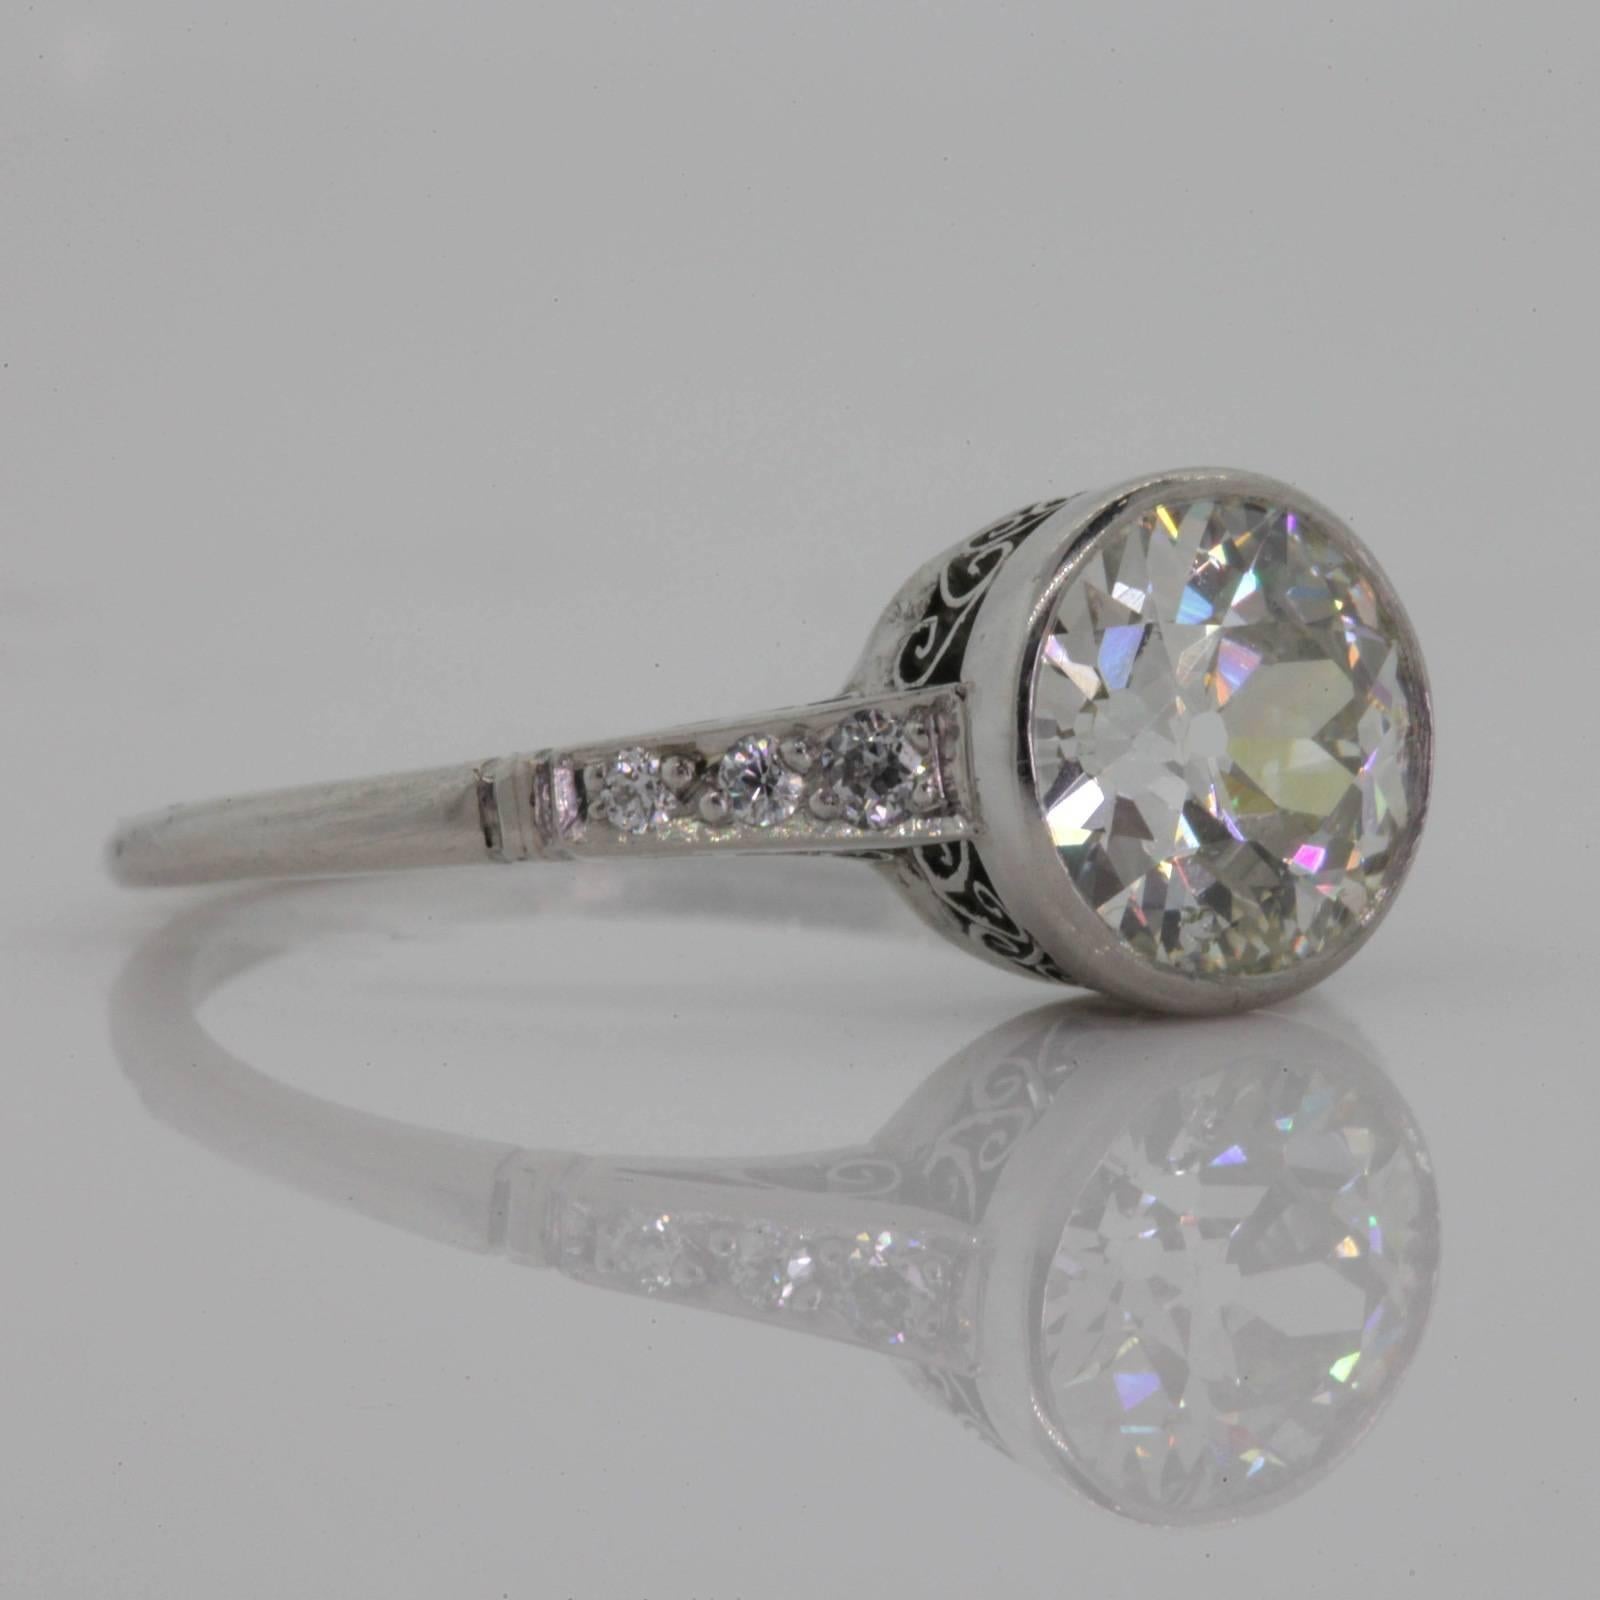 A lovely replica of a 1920's diamond and platinum ring, this handmade beauty showcases a 1.60 carat Old European cut Diamond K color - SI1 clarity.  The diamond is bezel set in a filigree basket, the ring  with graduating shoulders set with six Old